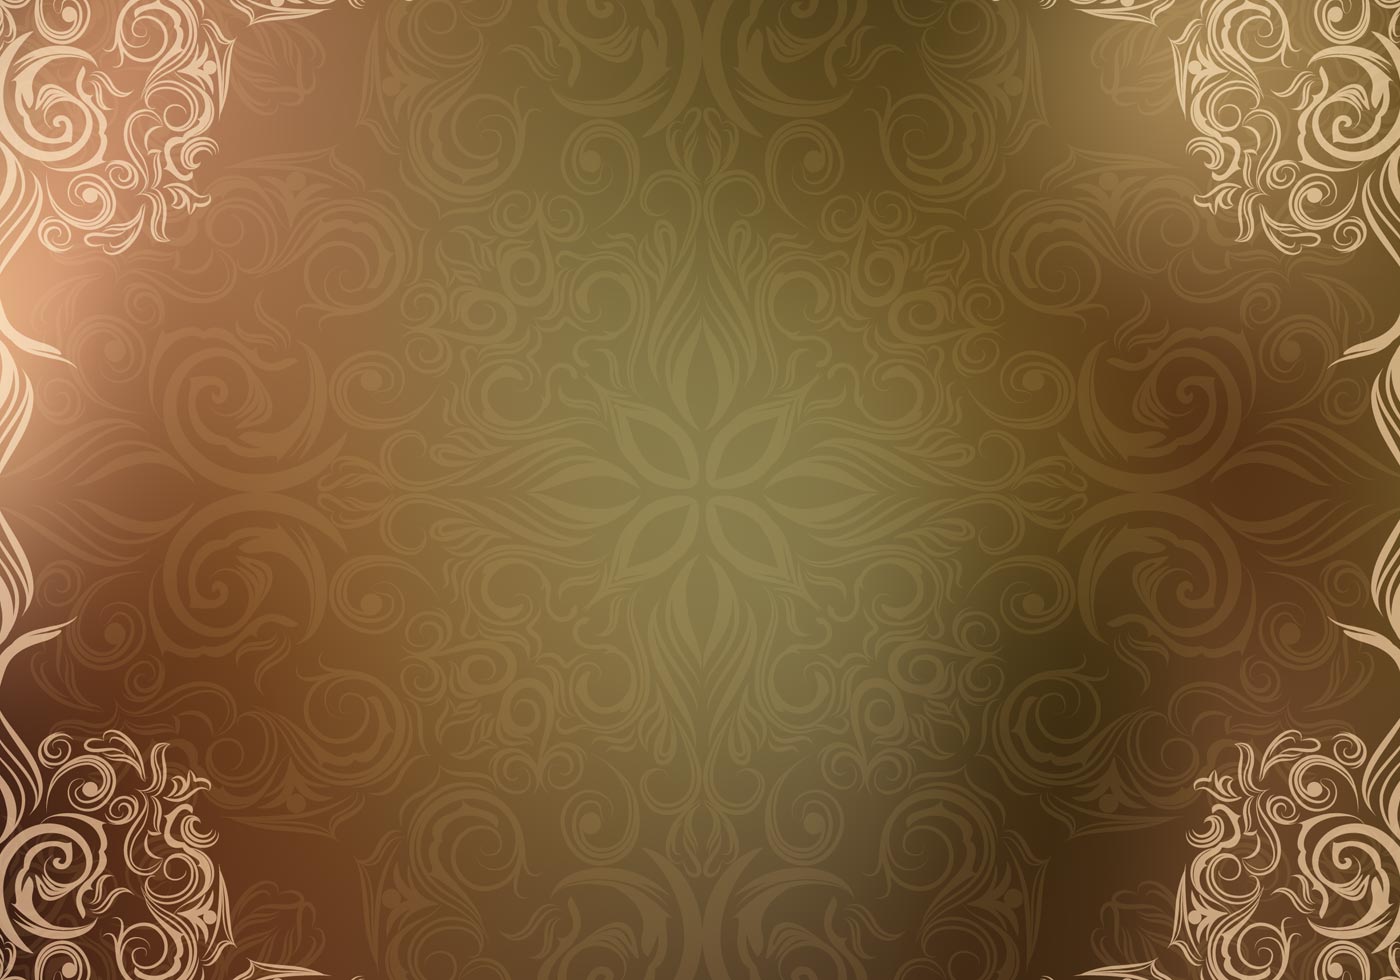 Ornate Wallpaper And Brush Pack - Papel De Parede Para Photoshop , HD Wallpaper & Backgrounds